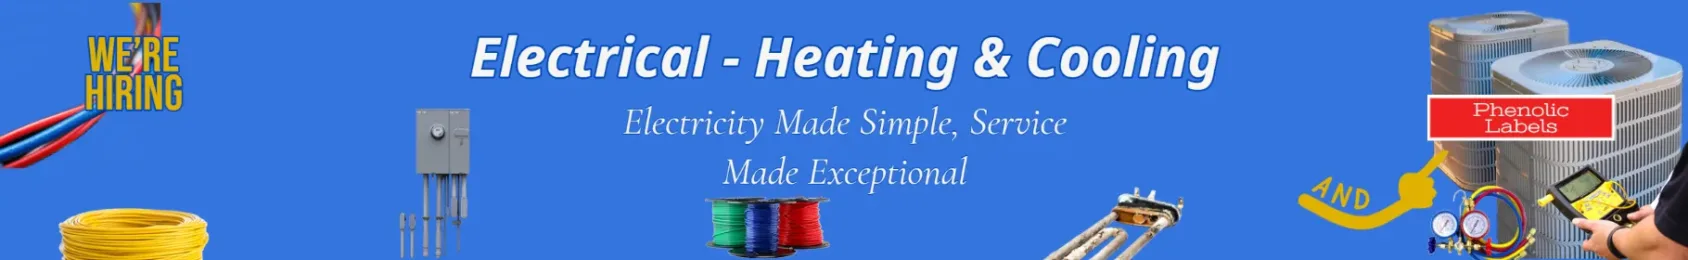 BHS Inc. Electricians Heating & Cooling and Phenolic Labels